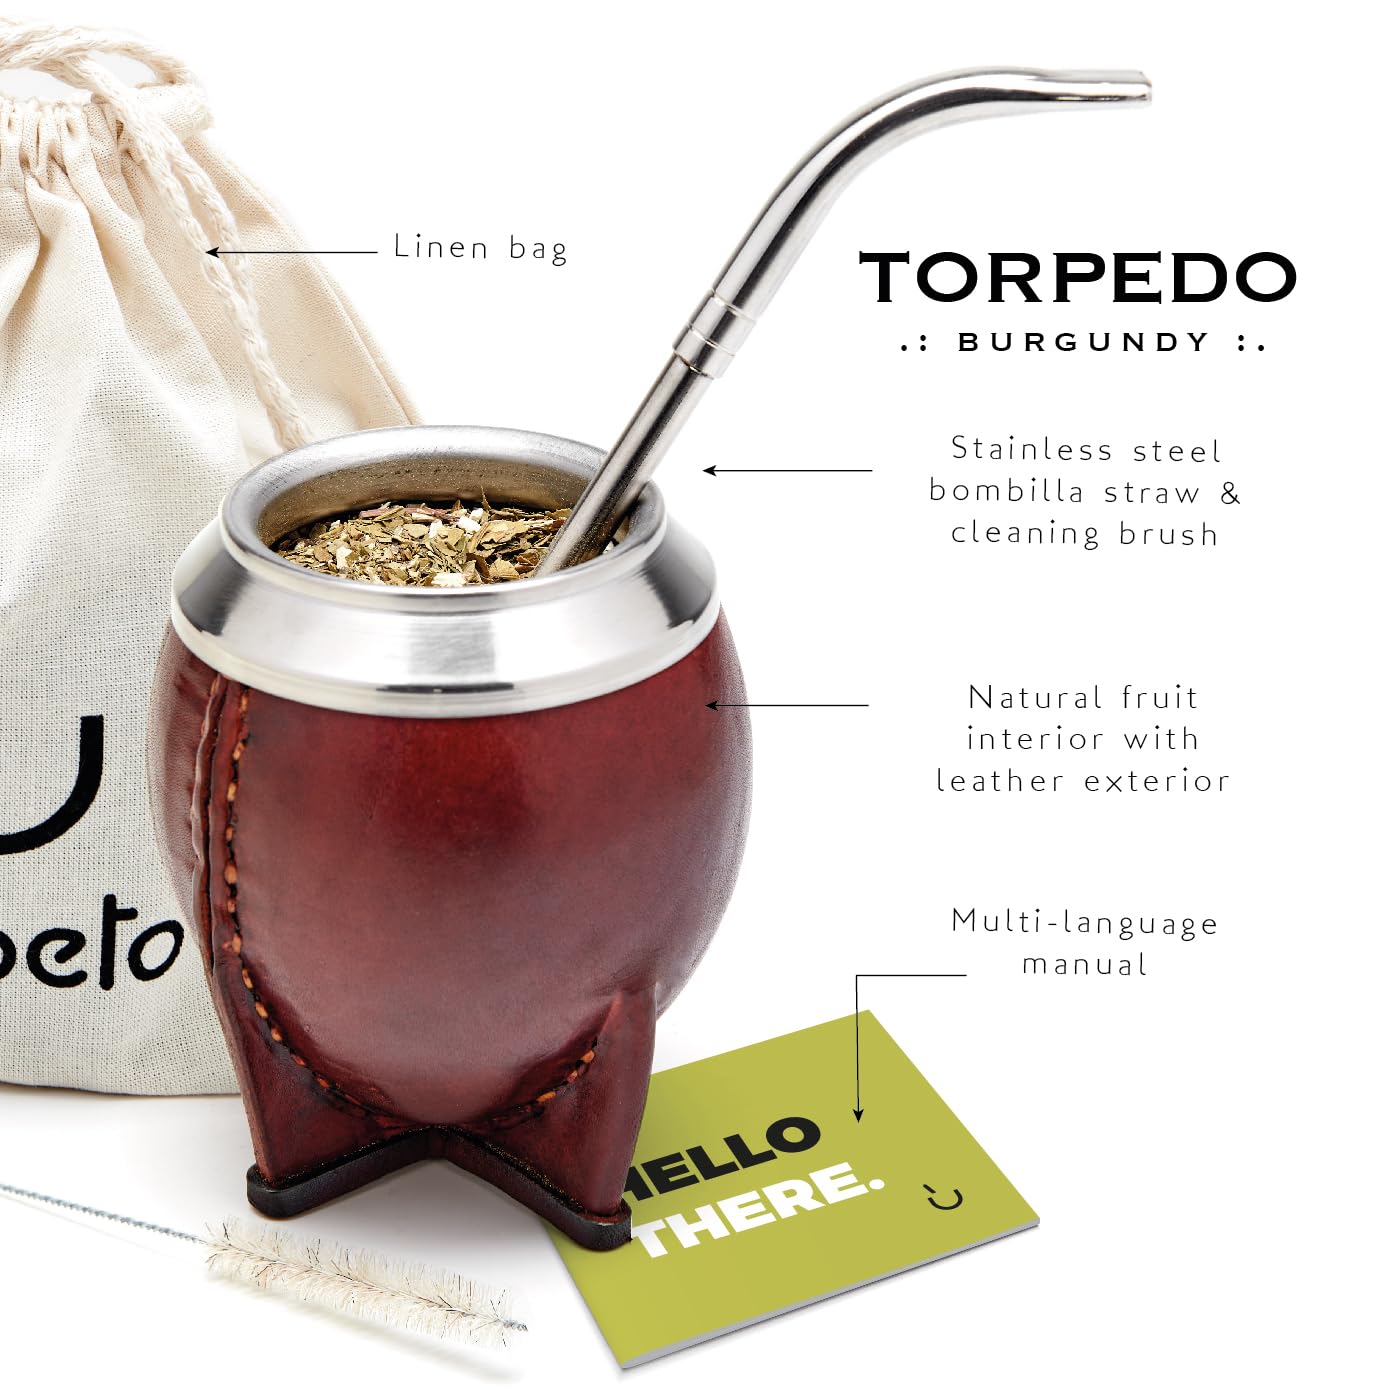 BALIBETOV Premium Yerba Mate Gourd (Mate Cup) - Uruguayan Mate - Leather Wrapped - Includes Stainless Steel Bombilla and Cleaning Brush. (Torpedo Burgundy)